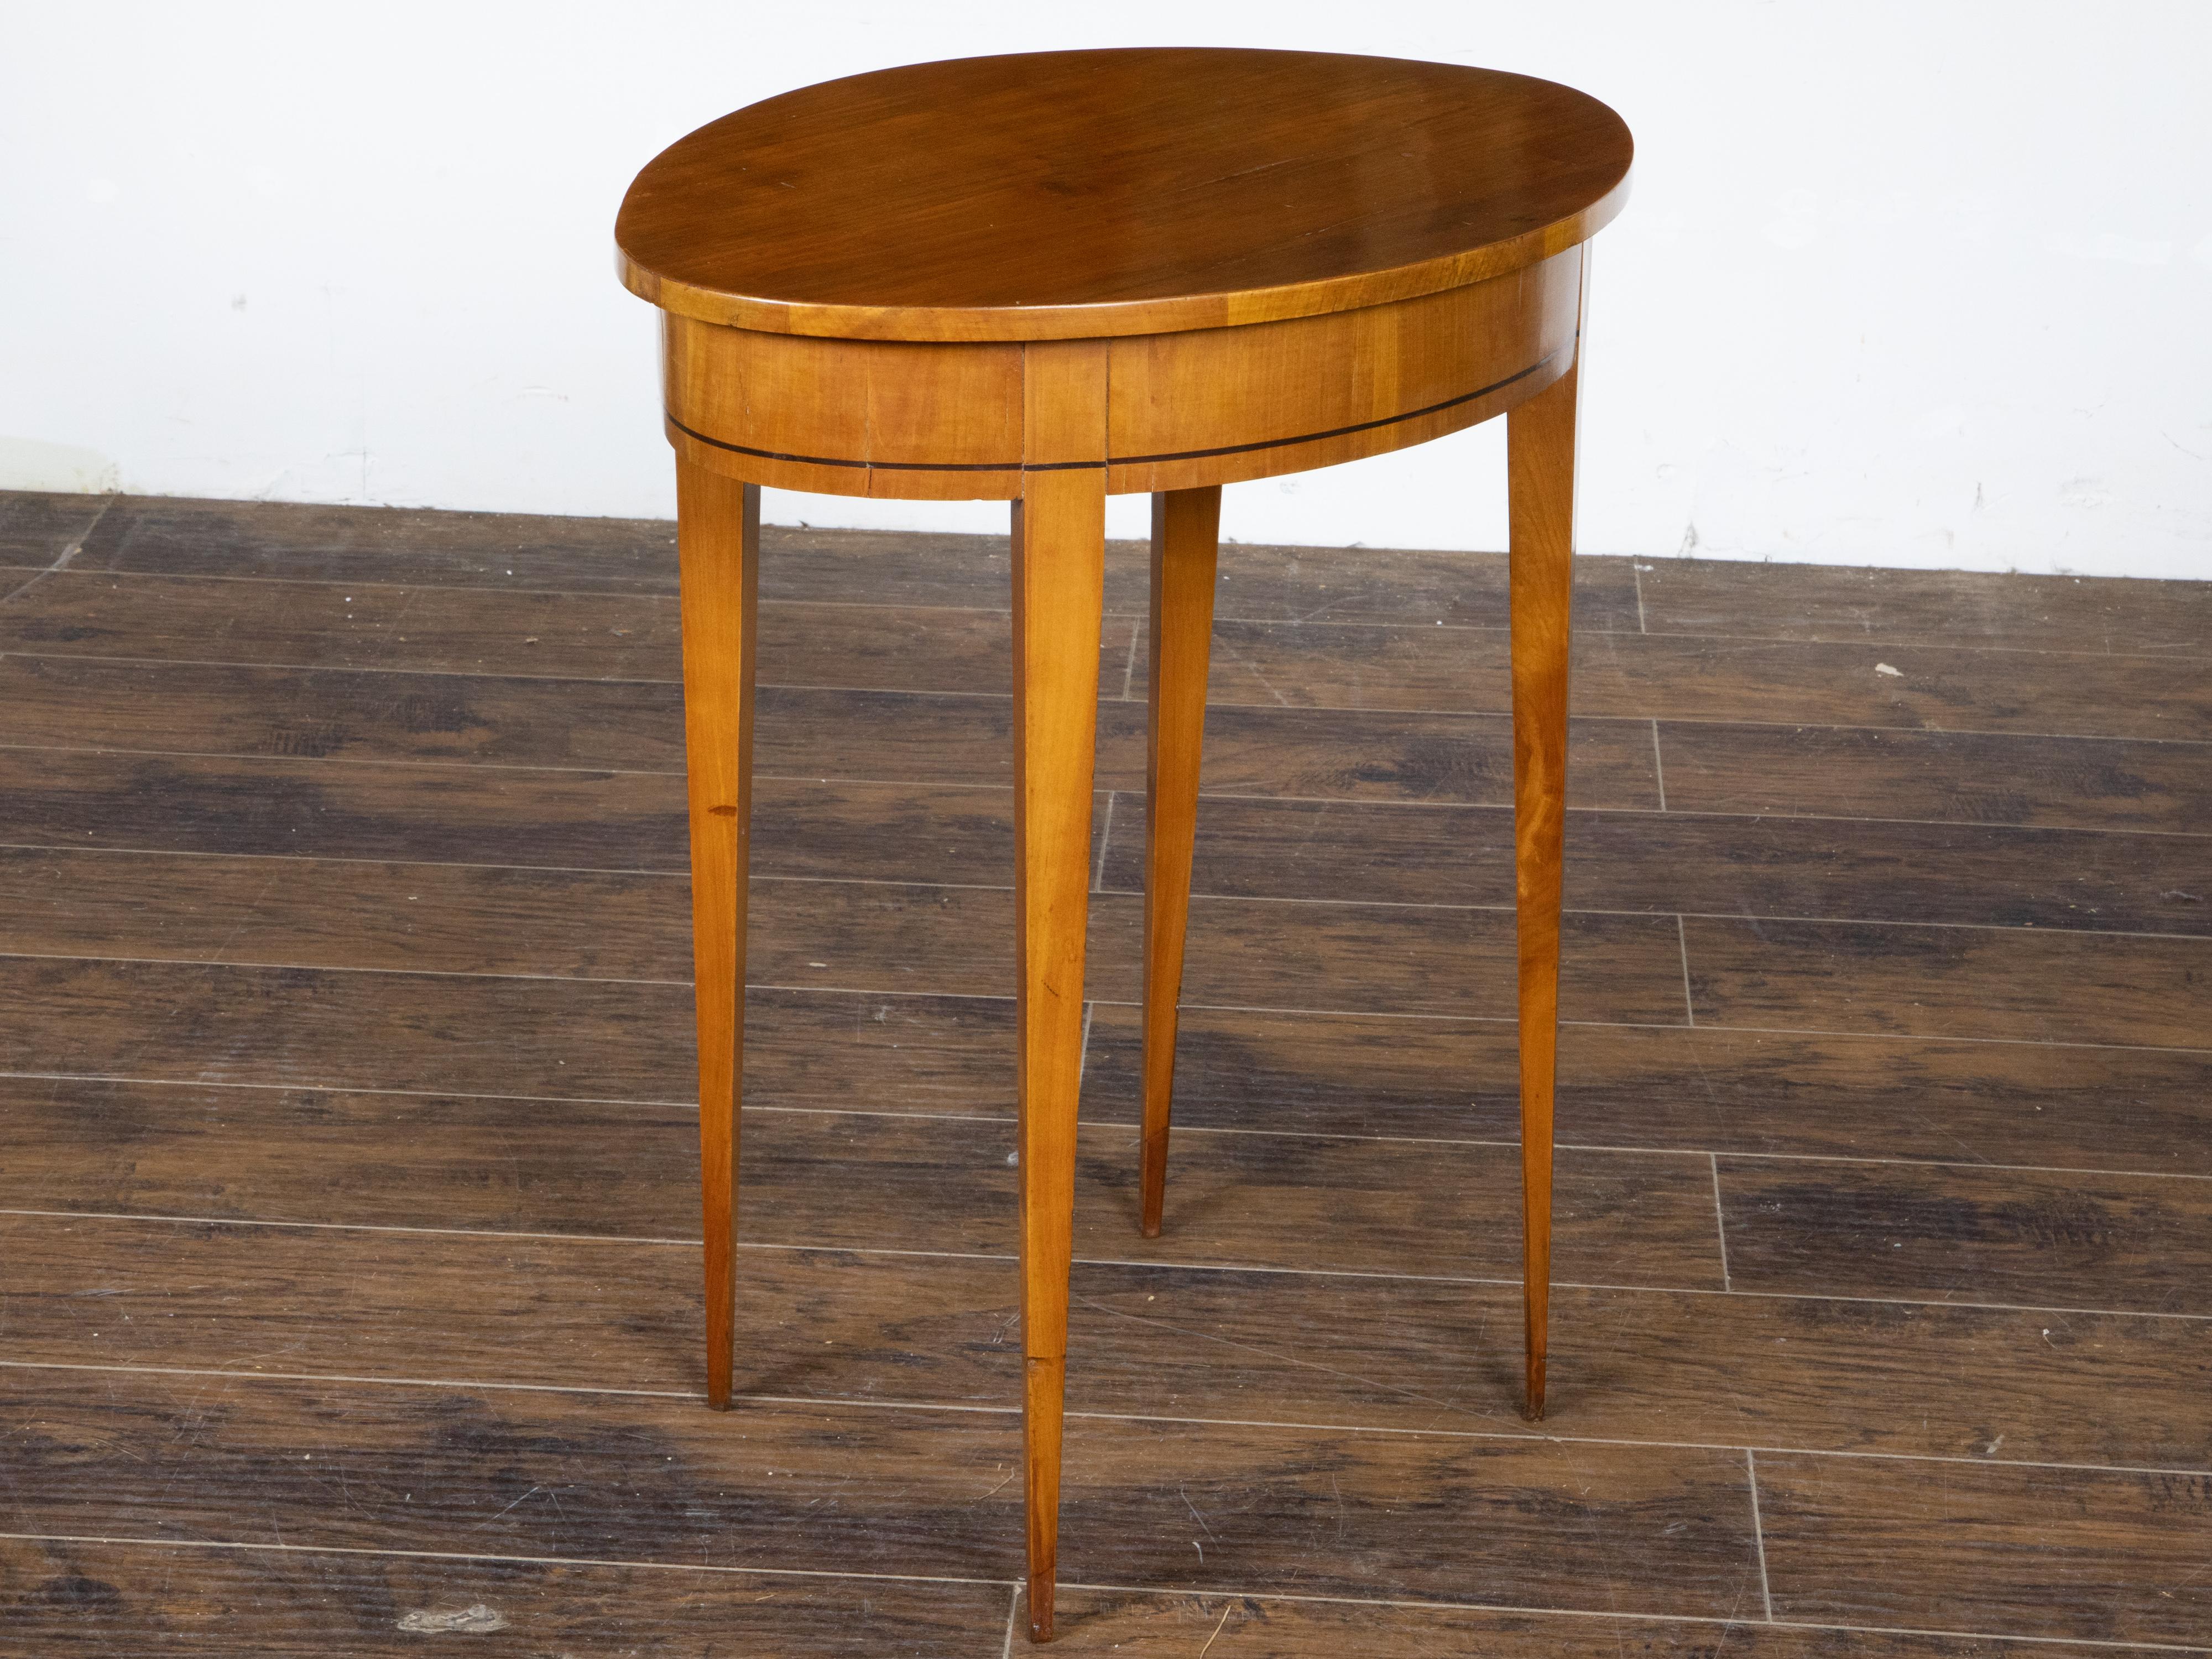 French Neoclassical Style 19th Century Walnut Table with Oval Top, Tapered Legs For Sale 3